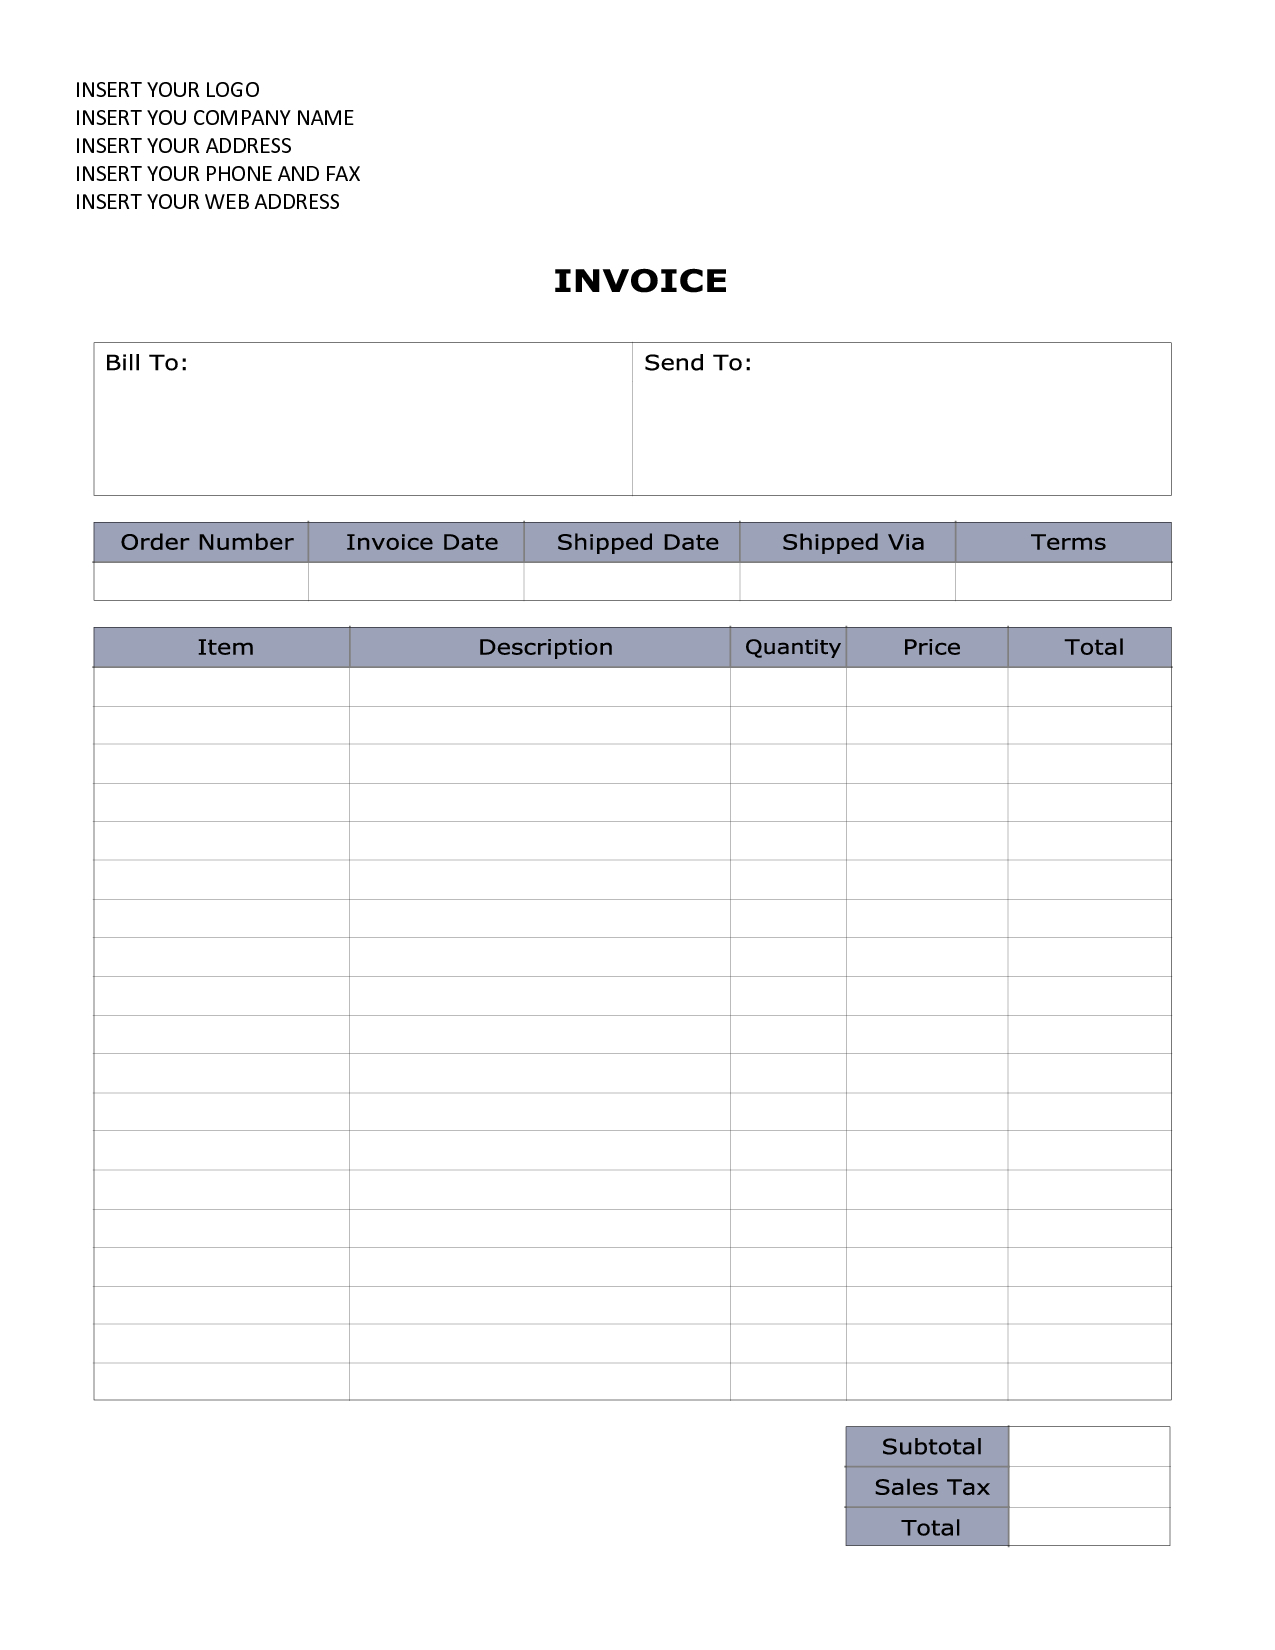 Invoice Template Word 2010 | Invoice Example Pertaining To Invoice Template Word 2010